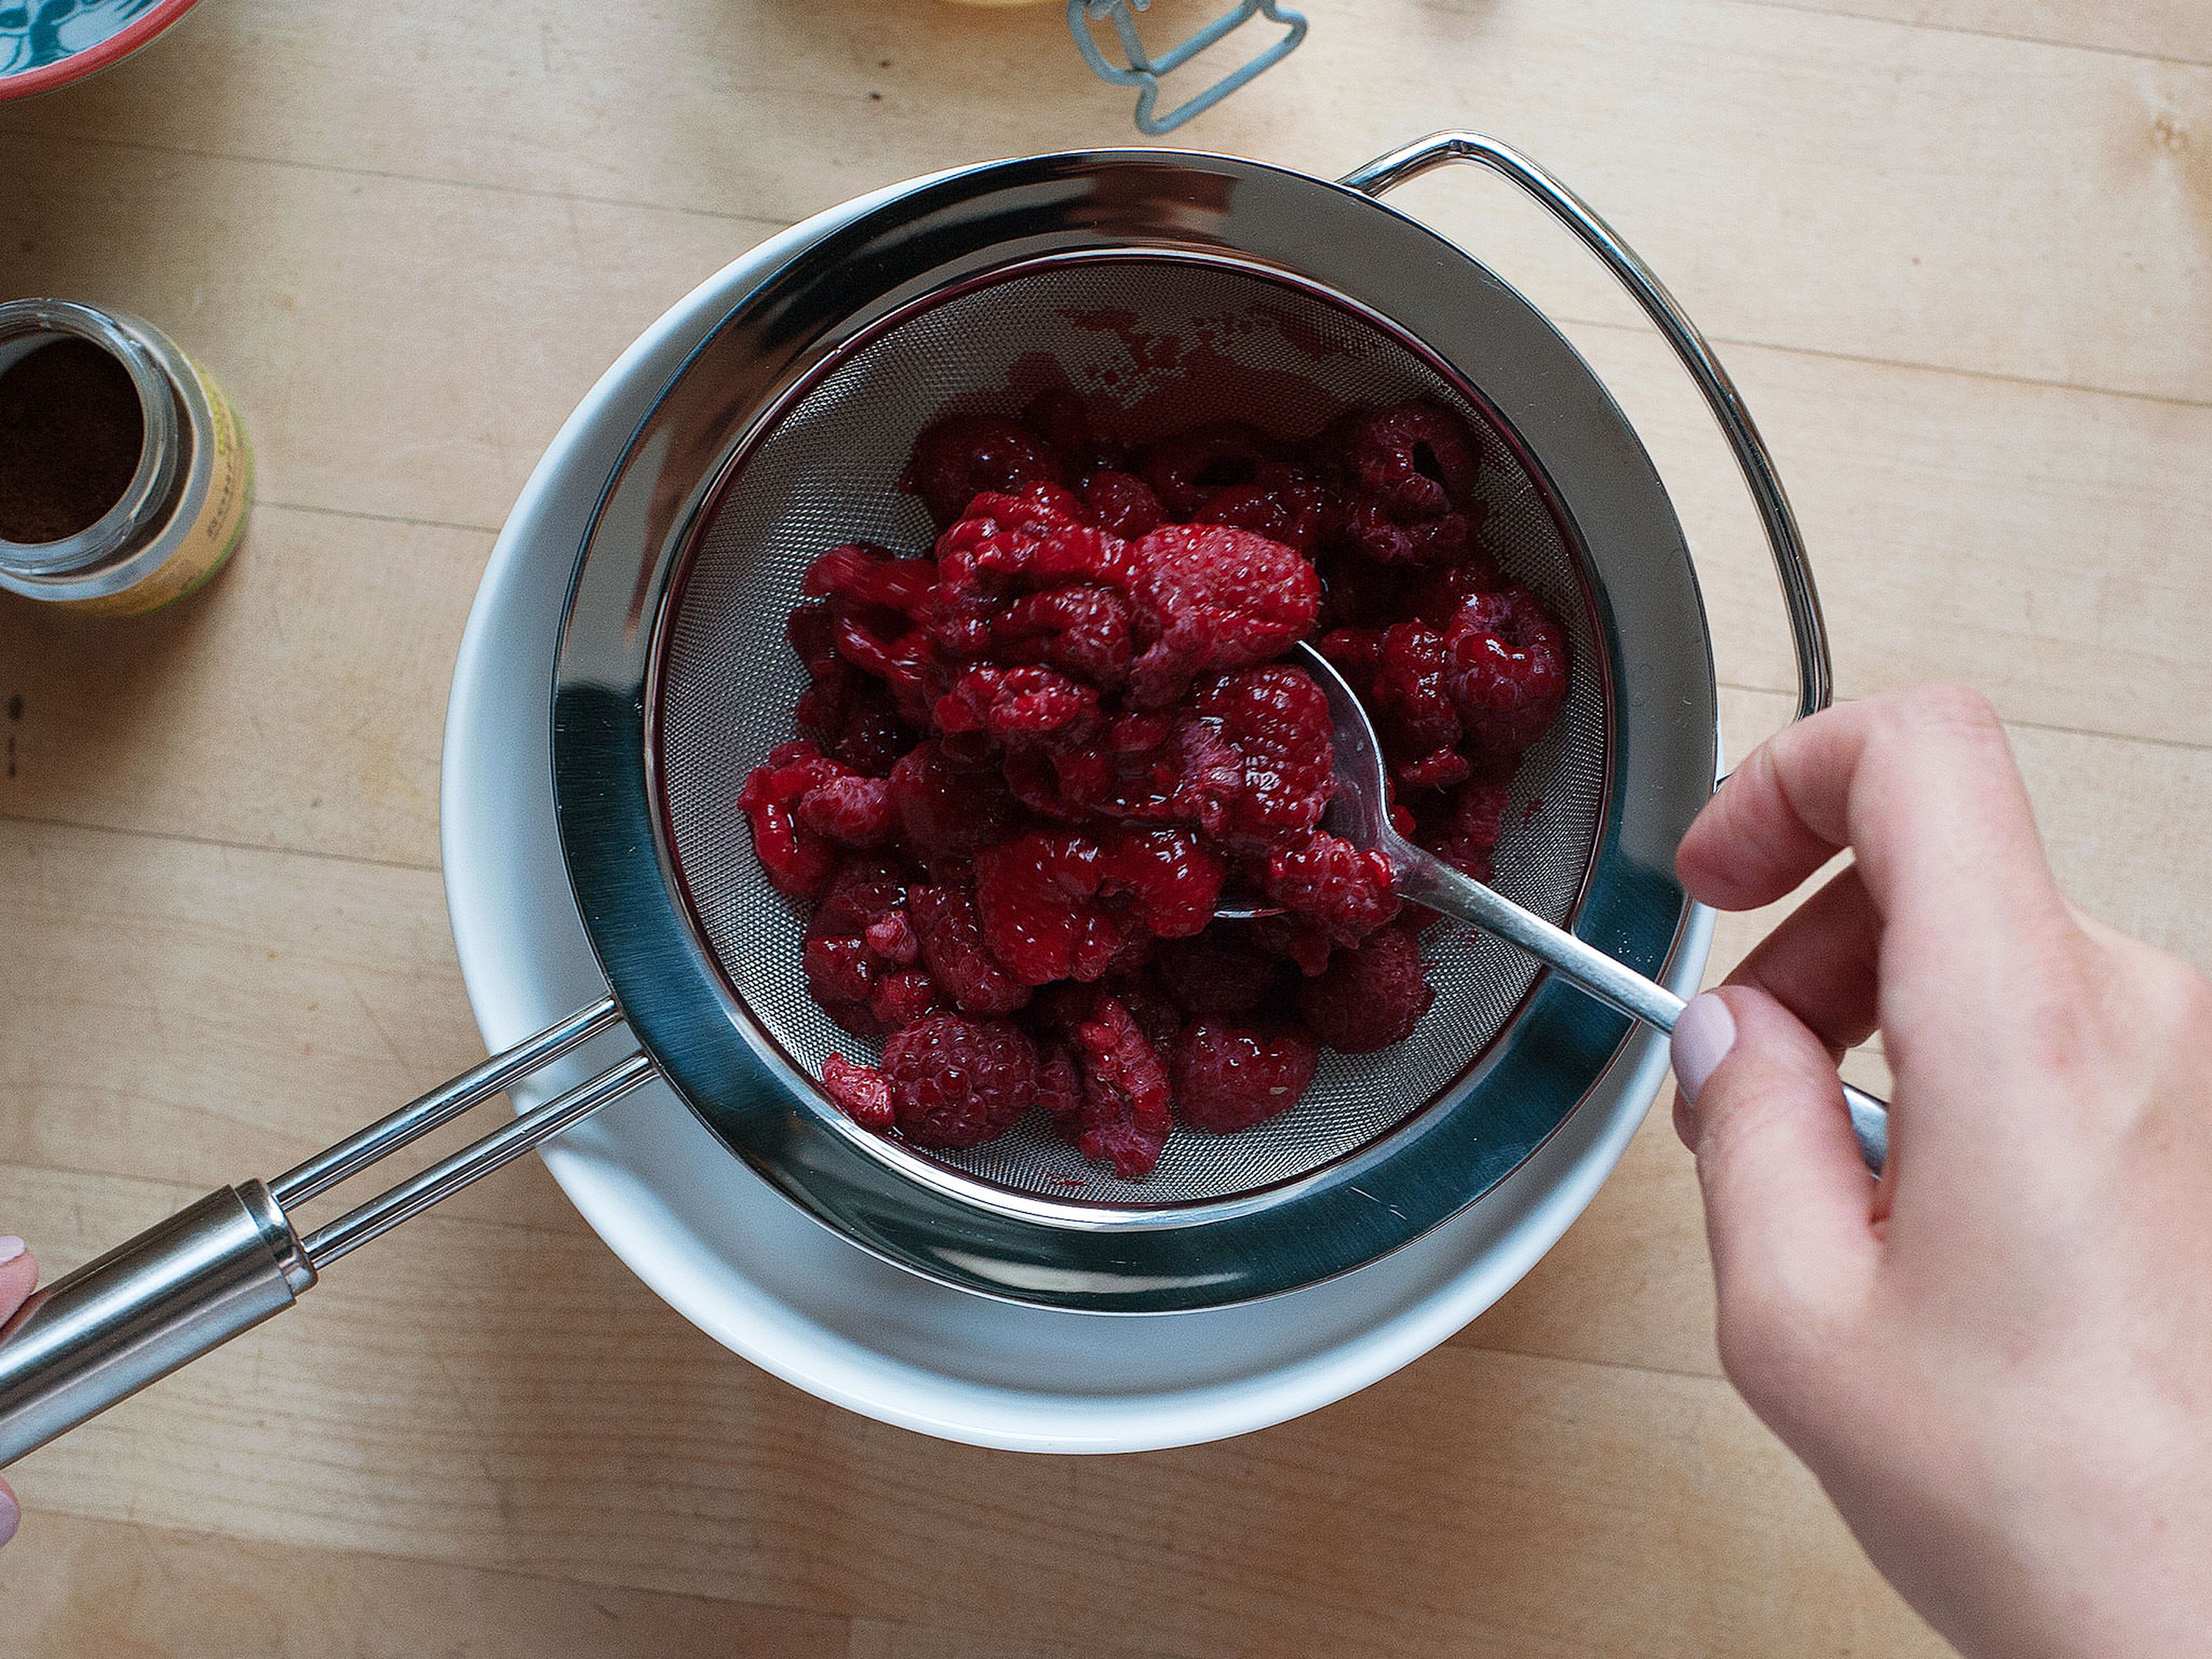 Defrost frozen raspberries, if using. Deseed raspberries by pushing them through a sieve into a mixing bowl.